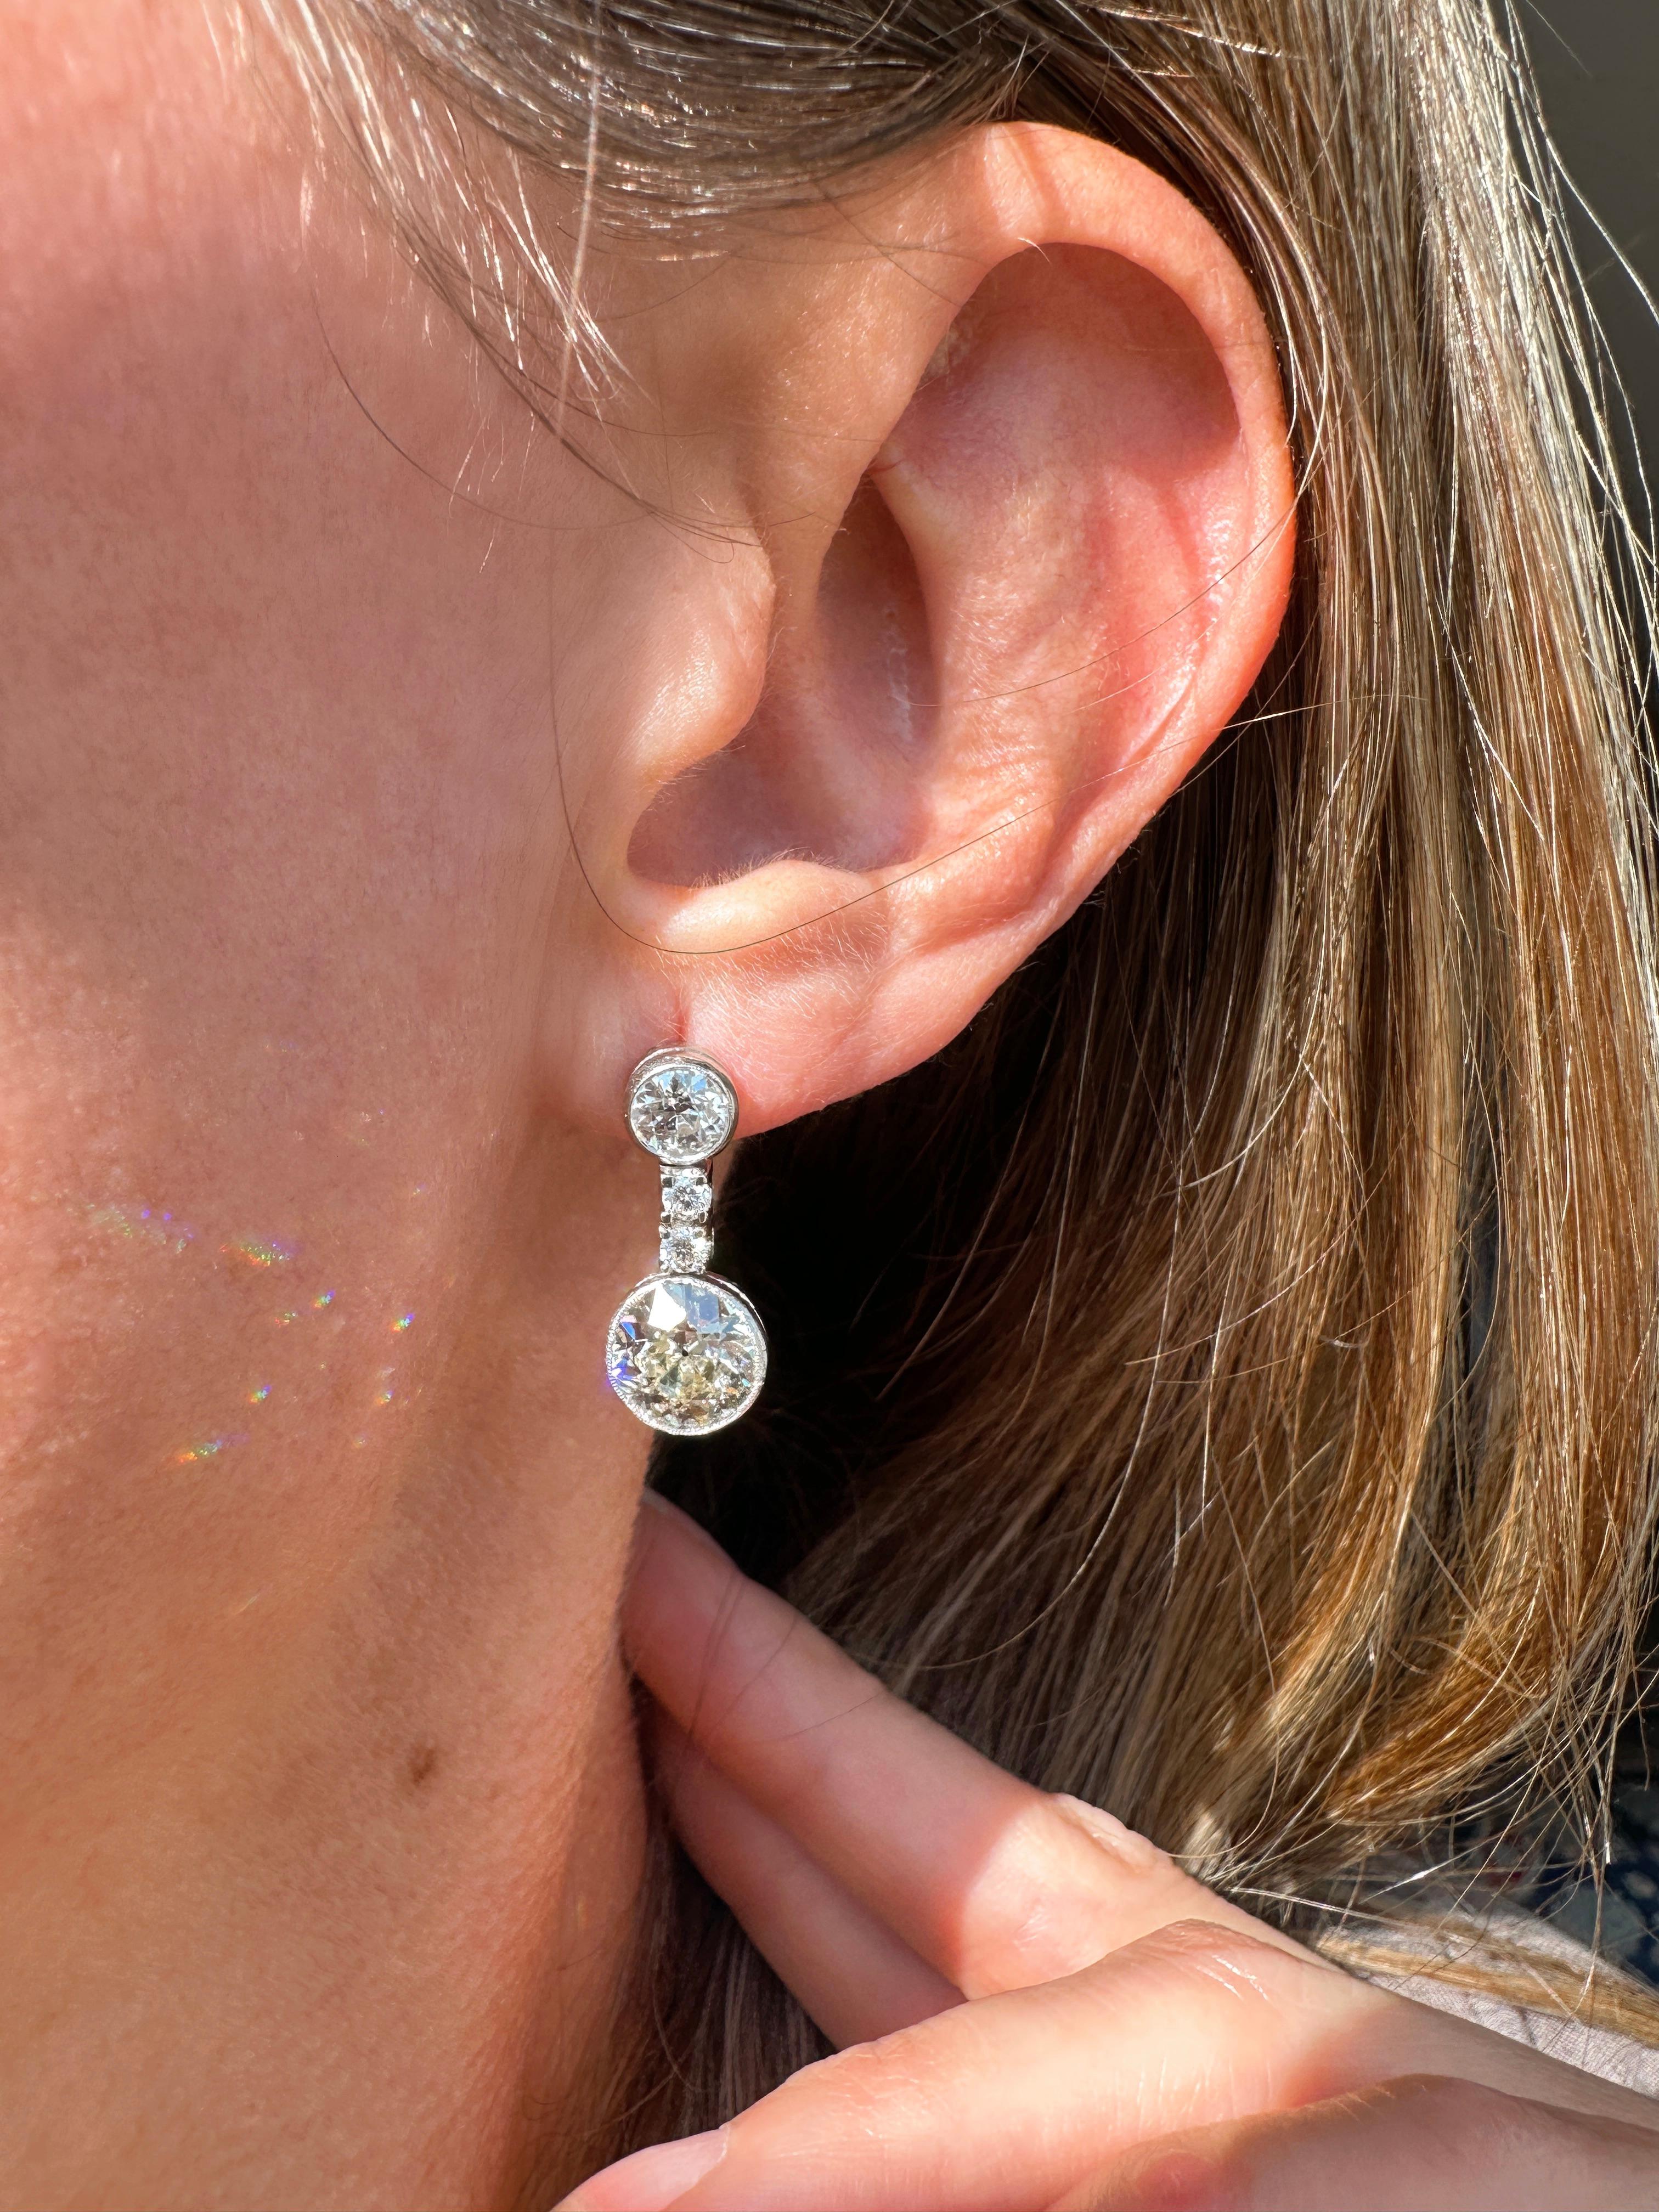 These dazzling Art Deco diamond drops highlight a sizable matched pair of sunshiny European-cut diamonds, together weighing 3.47 carats, swing and sway from below a.50 carat old mine-cut diamond post and pair of sparkling brilliant-cut diamonds.